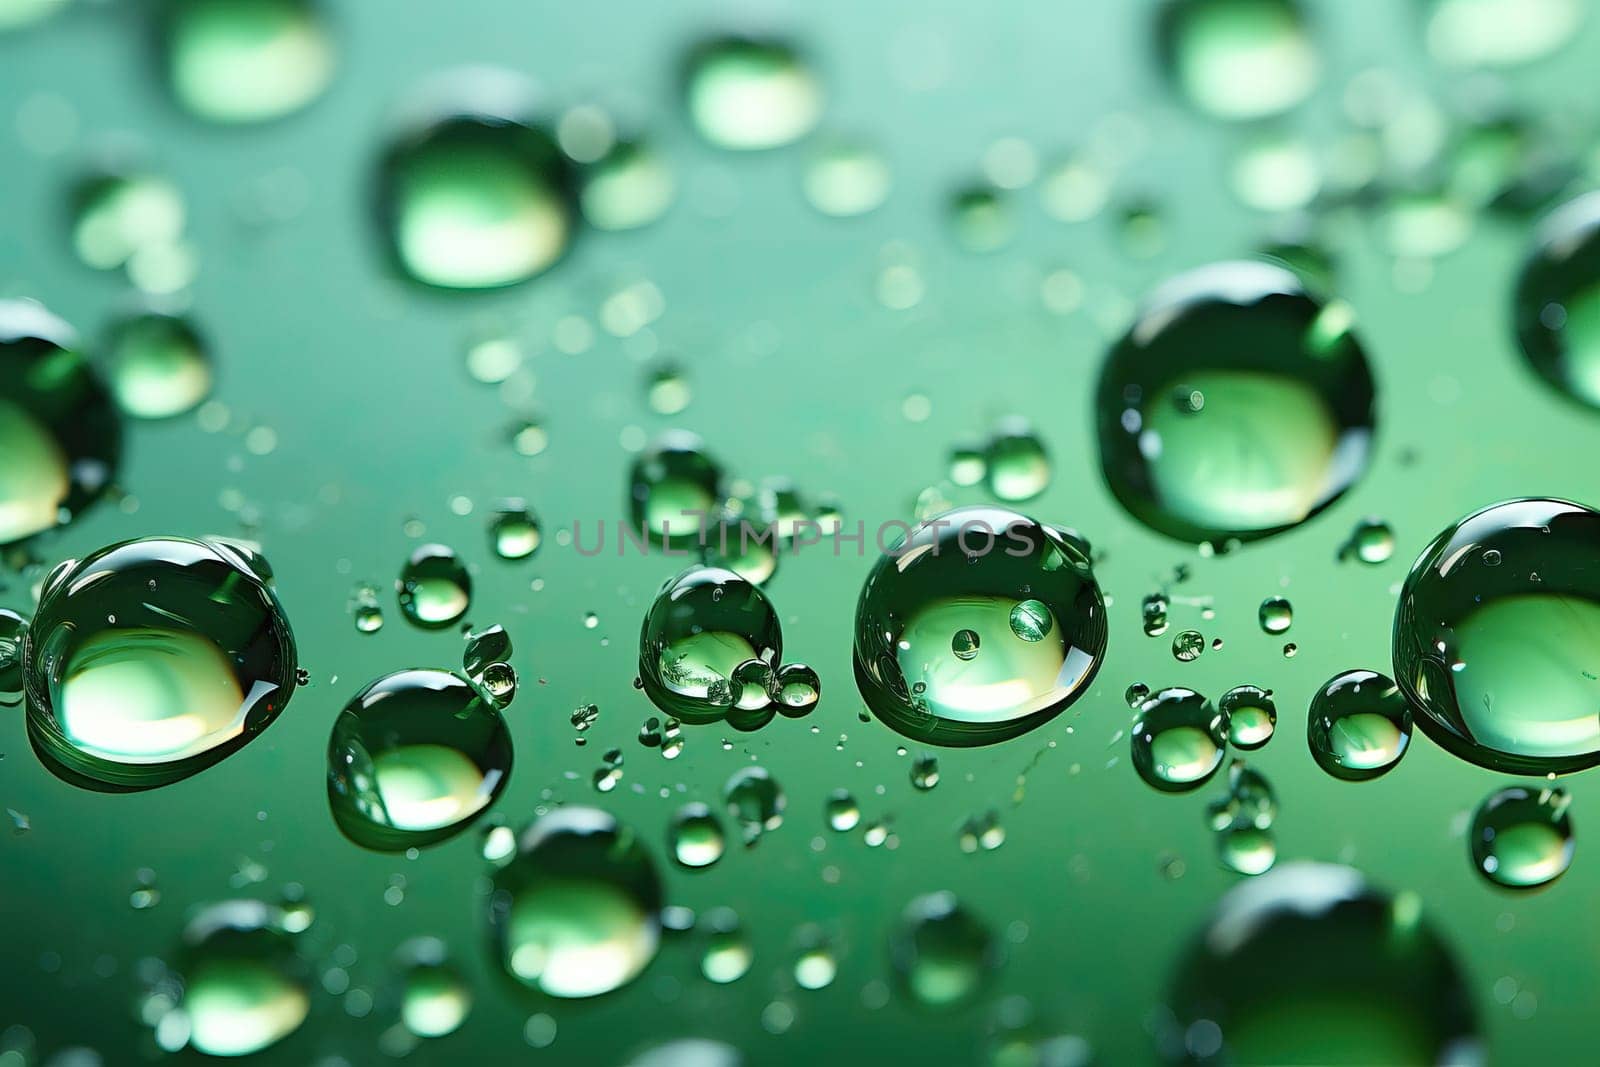 Green texture with round drops of liquid, drops of water and glycerin, illuminated by macro drops on a green background.